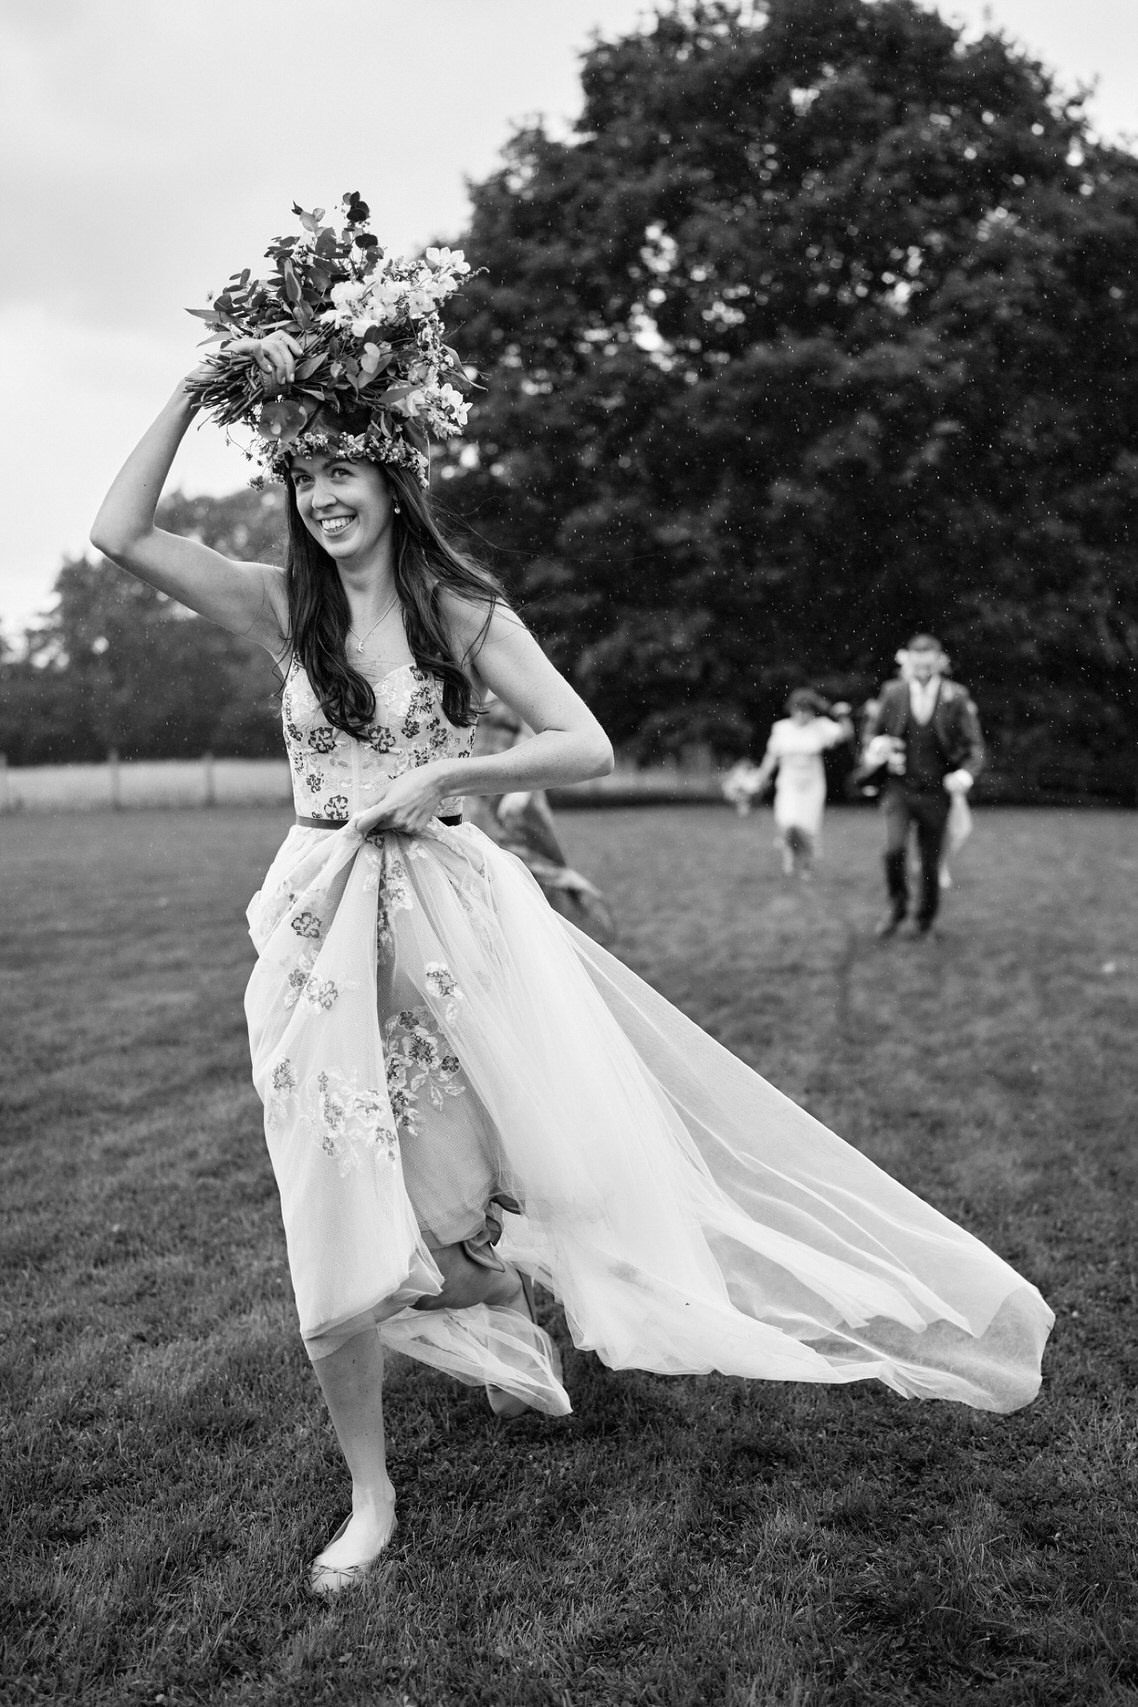 A woman who's just gotten married, sprinting across a meadow wearing a wreath of flowers in her hair.